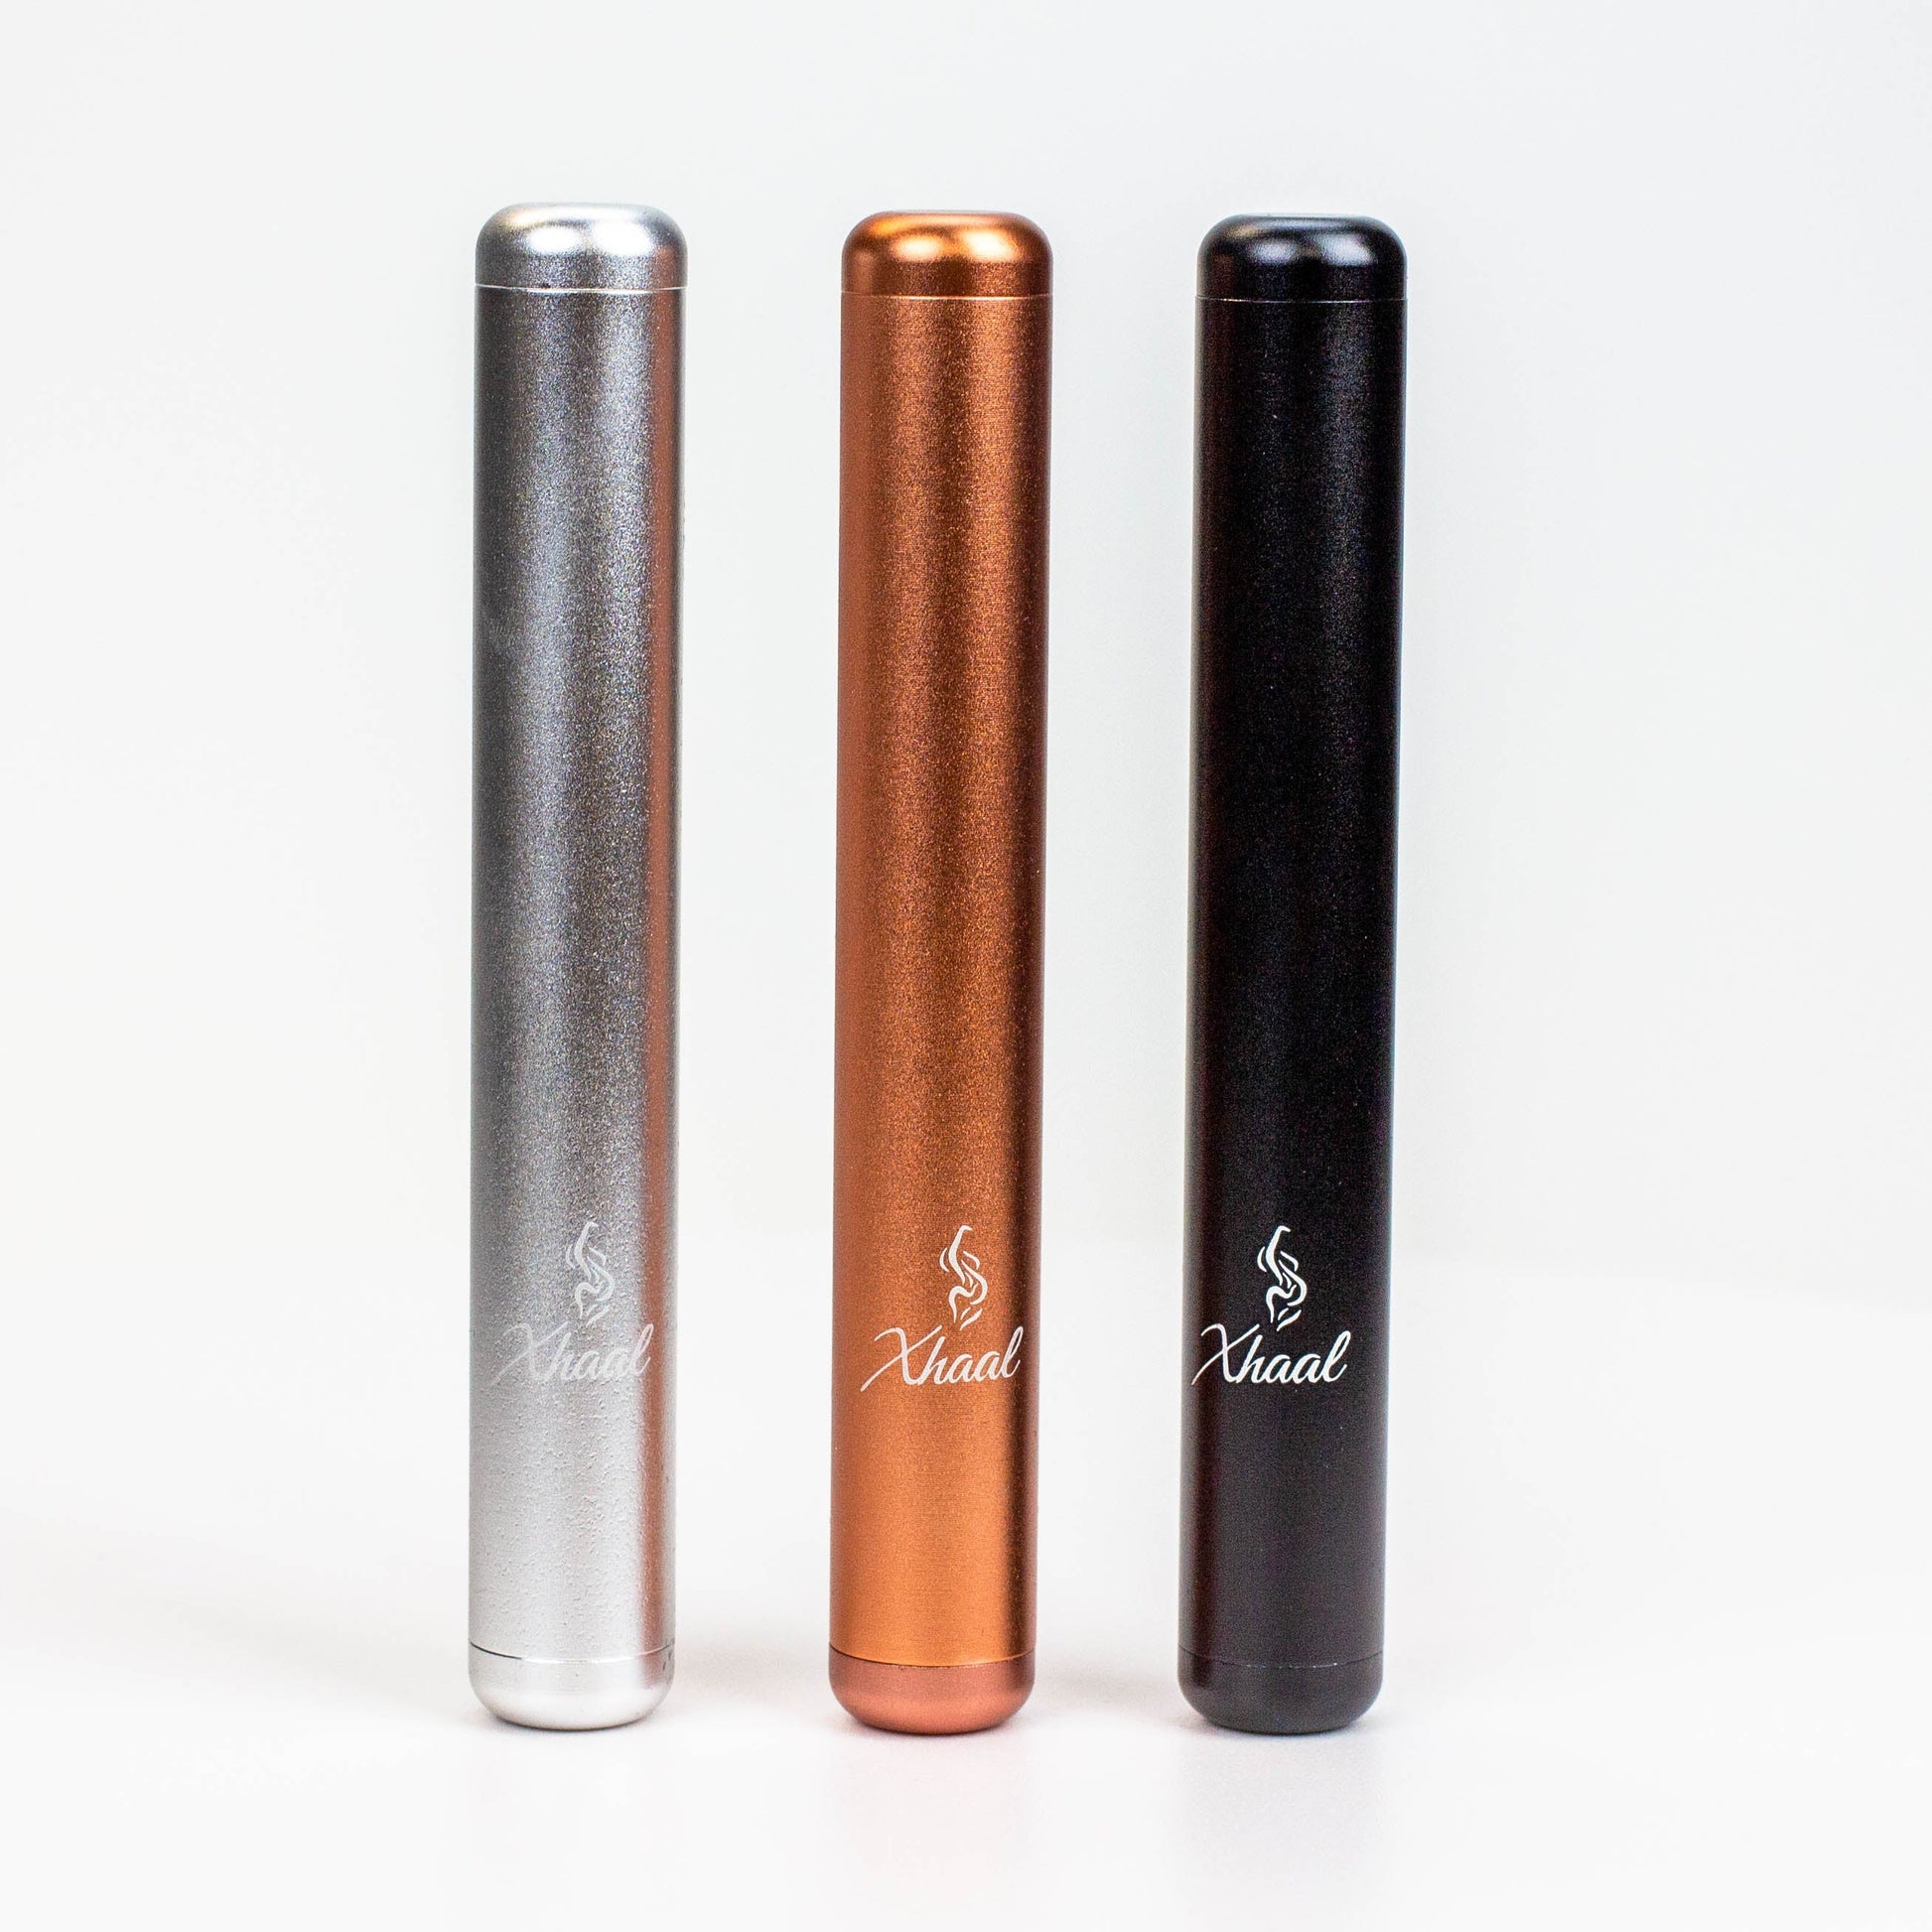 Xhaal Pre-Roll Joint single Cases_0